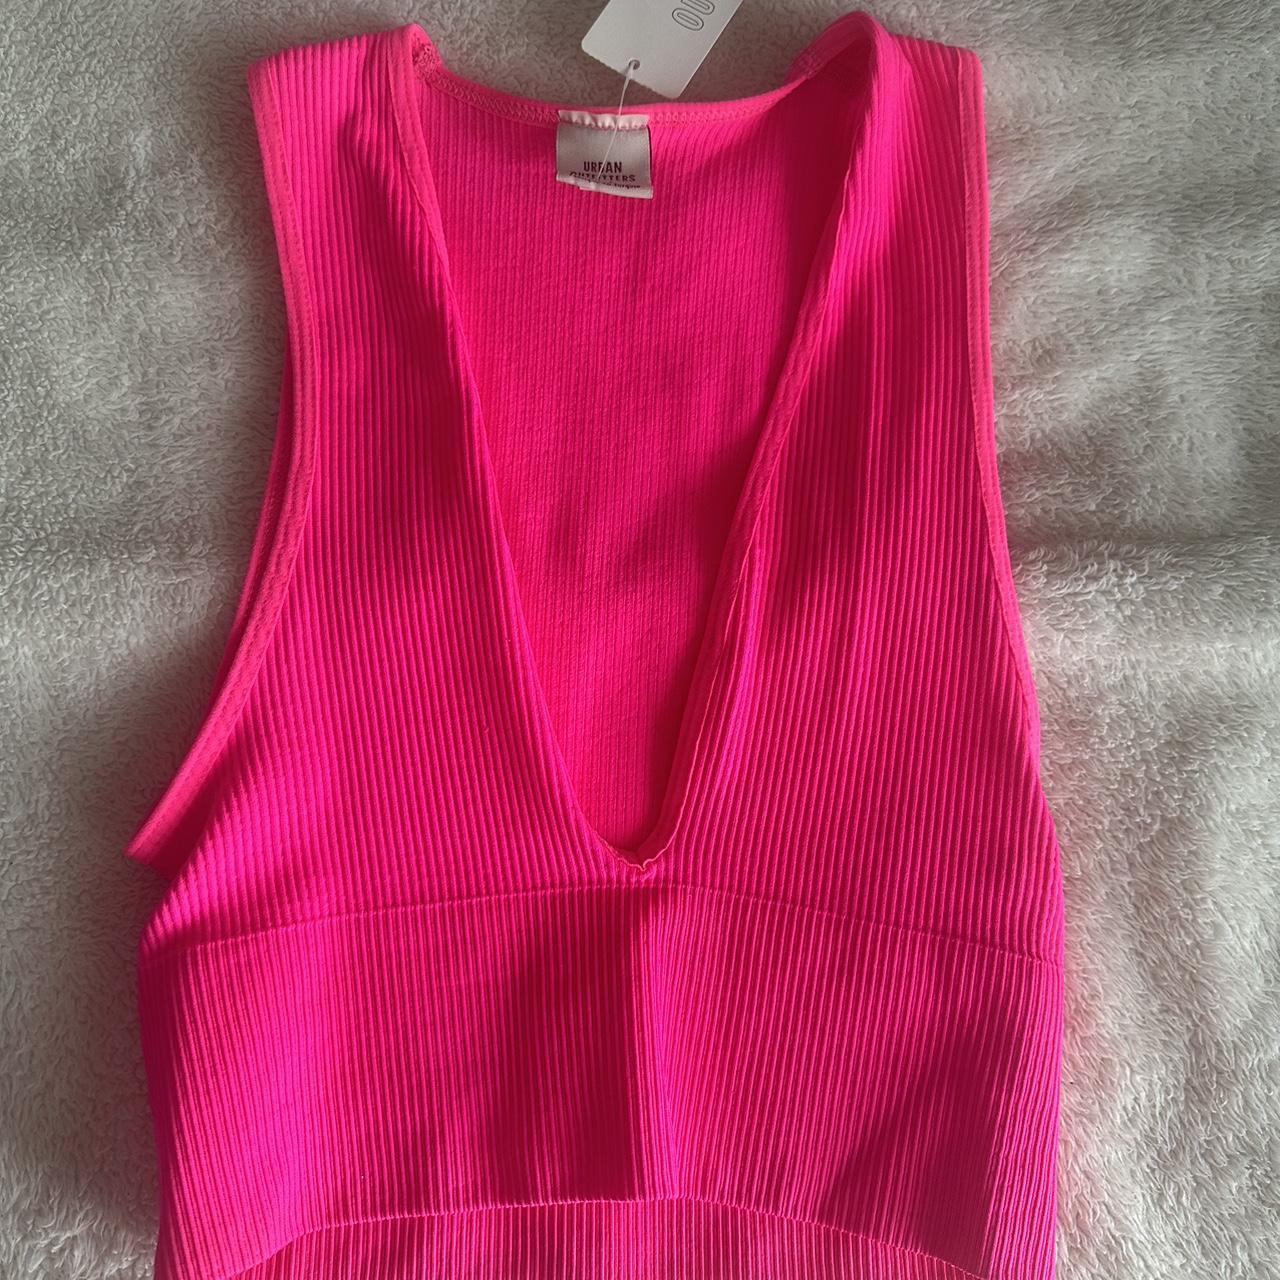 Urban outfitters josie top Size xs Never worn with... - Depop